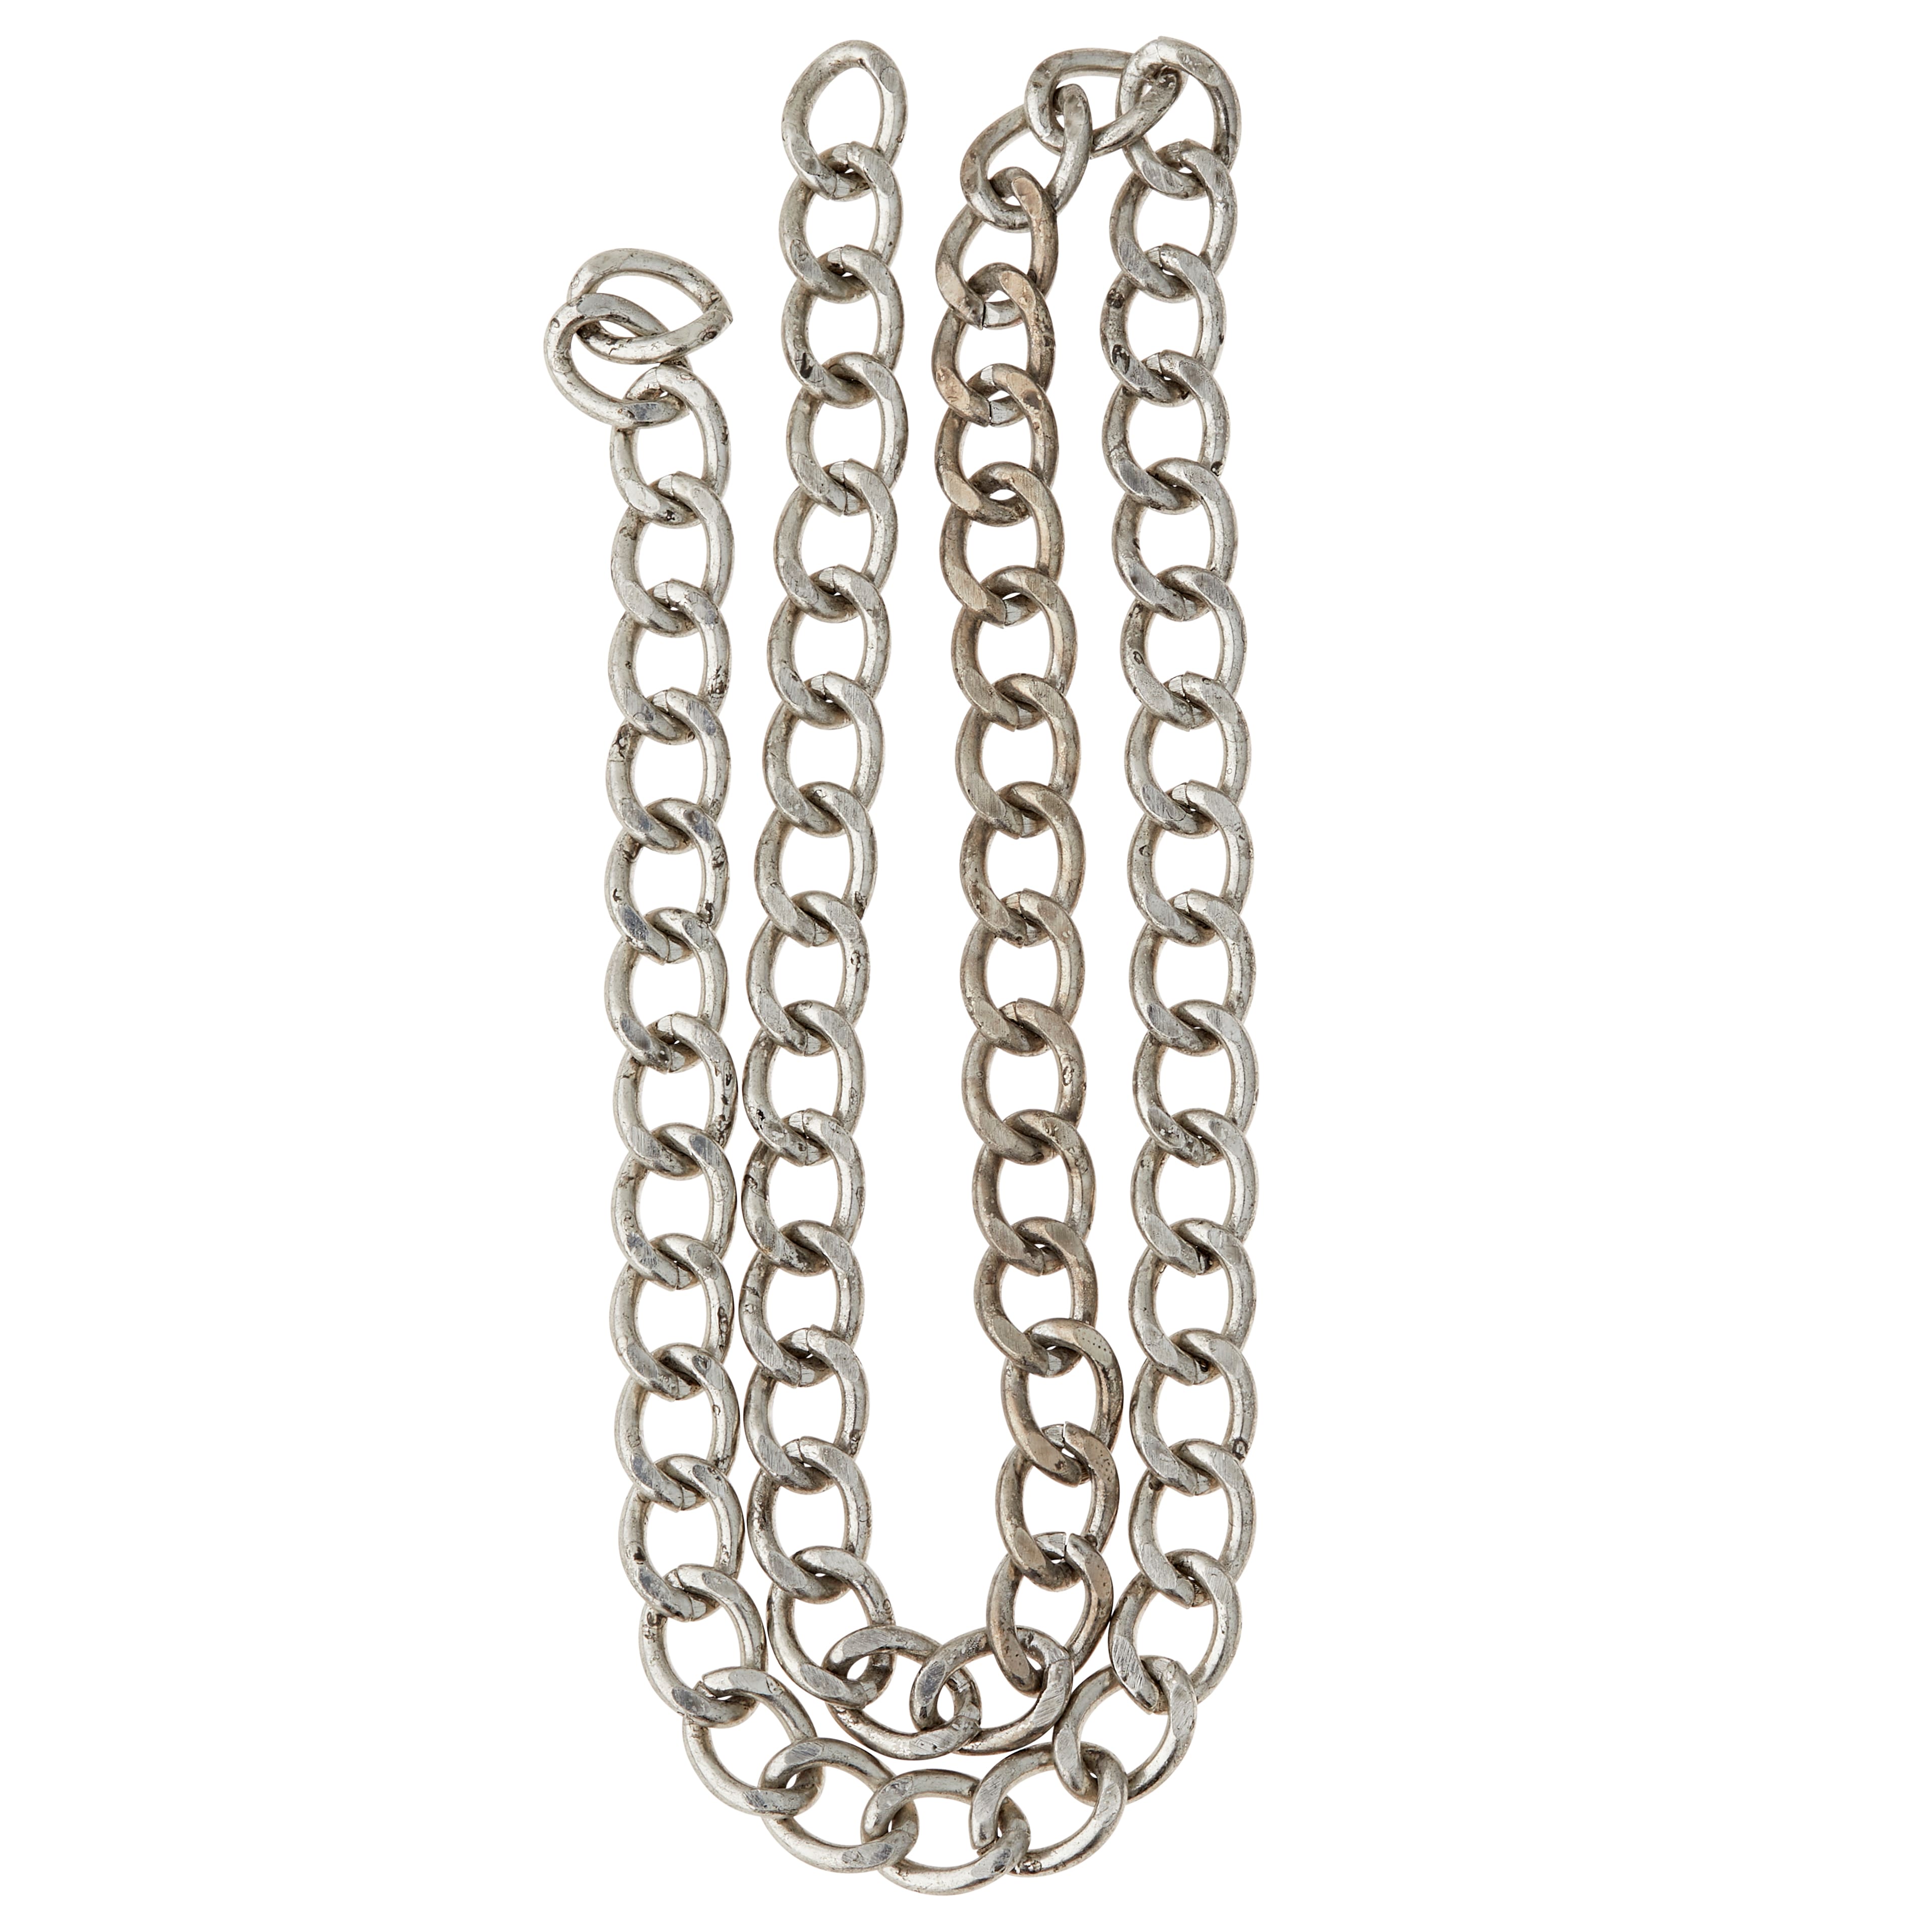 Bead Landing™ Antique Silver-Plated Chain, 24